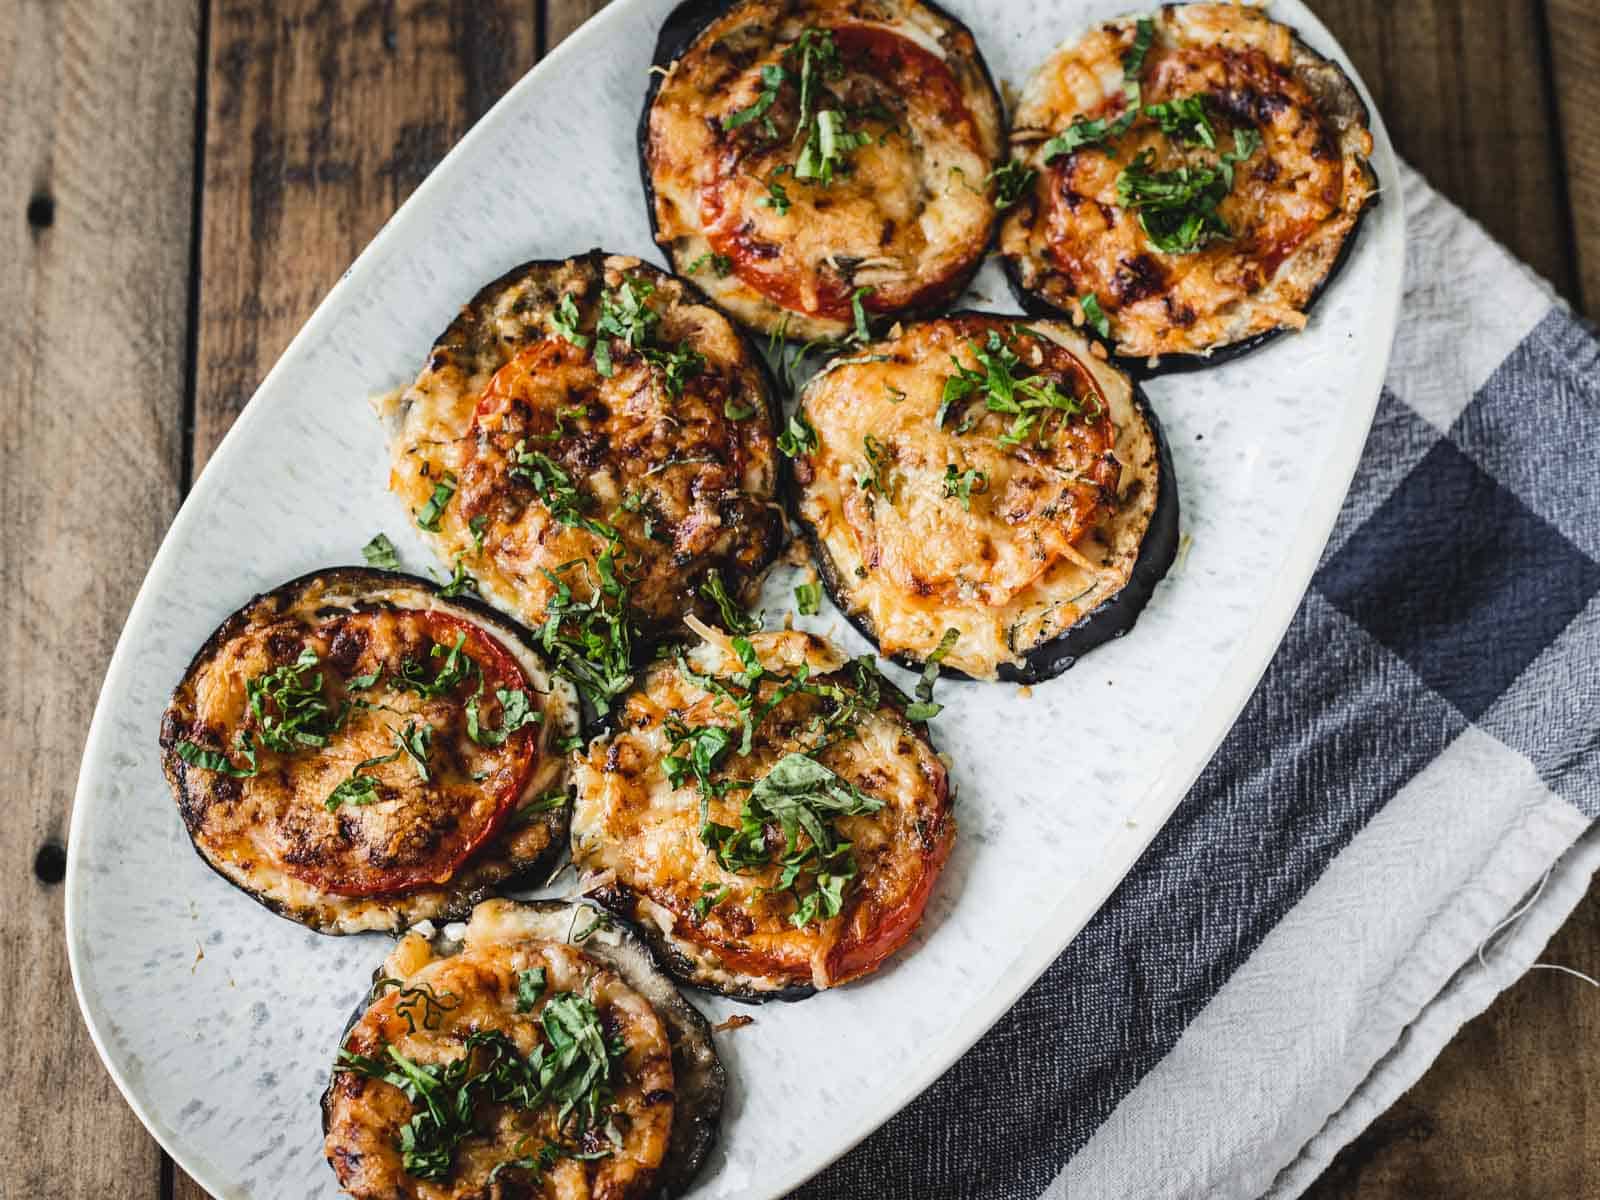 Eggplant tomato stacks with grilled eggplant slices and tomato layers.